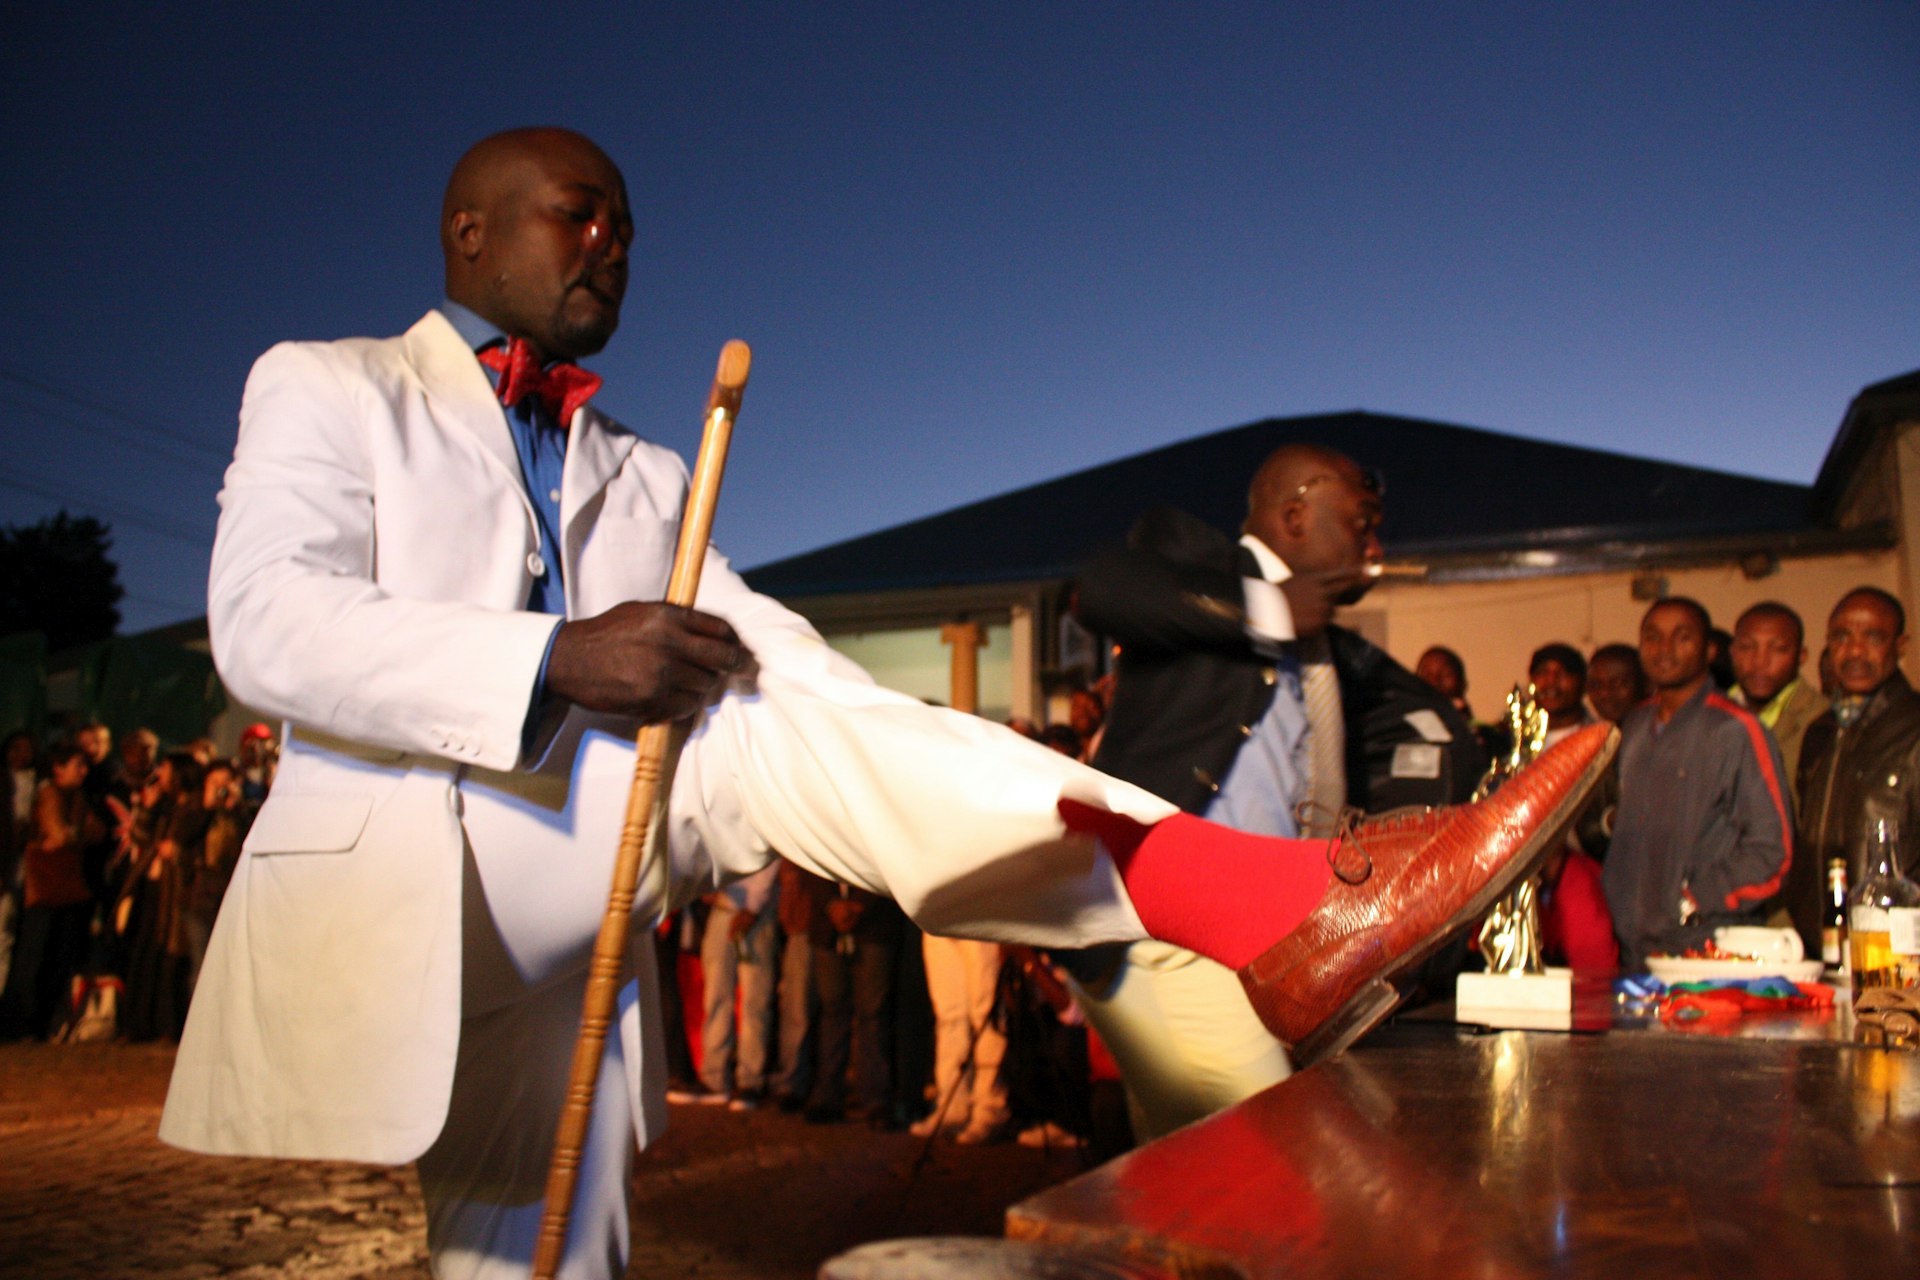 A Congolese national parades in front of fans during the La Sape competition at Kin Malebo restaurant, in Yeoville, Johannesburg South Africa, 30 May 2009. Photography Daniele Tamagni.